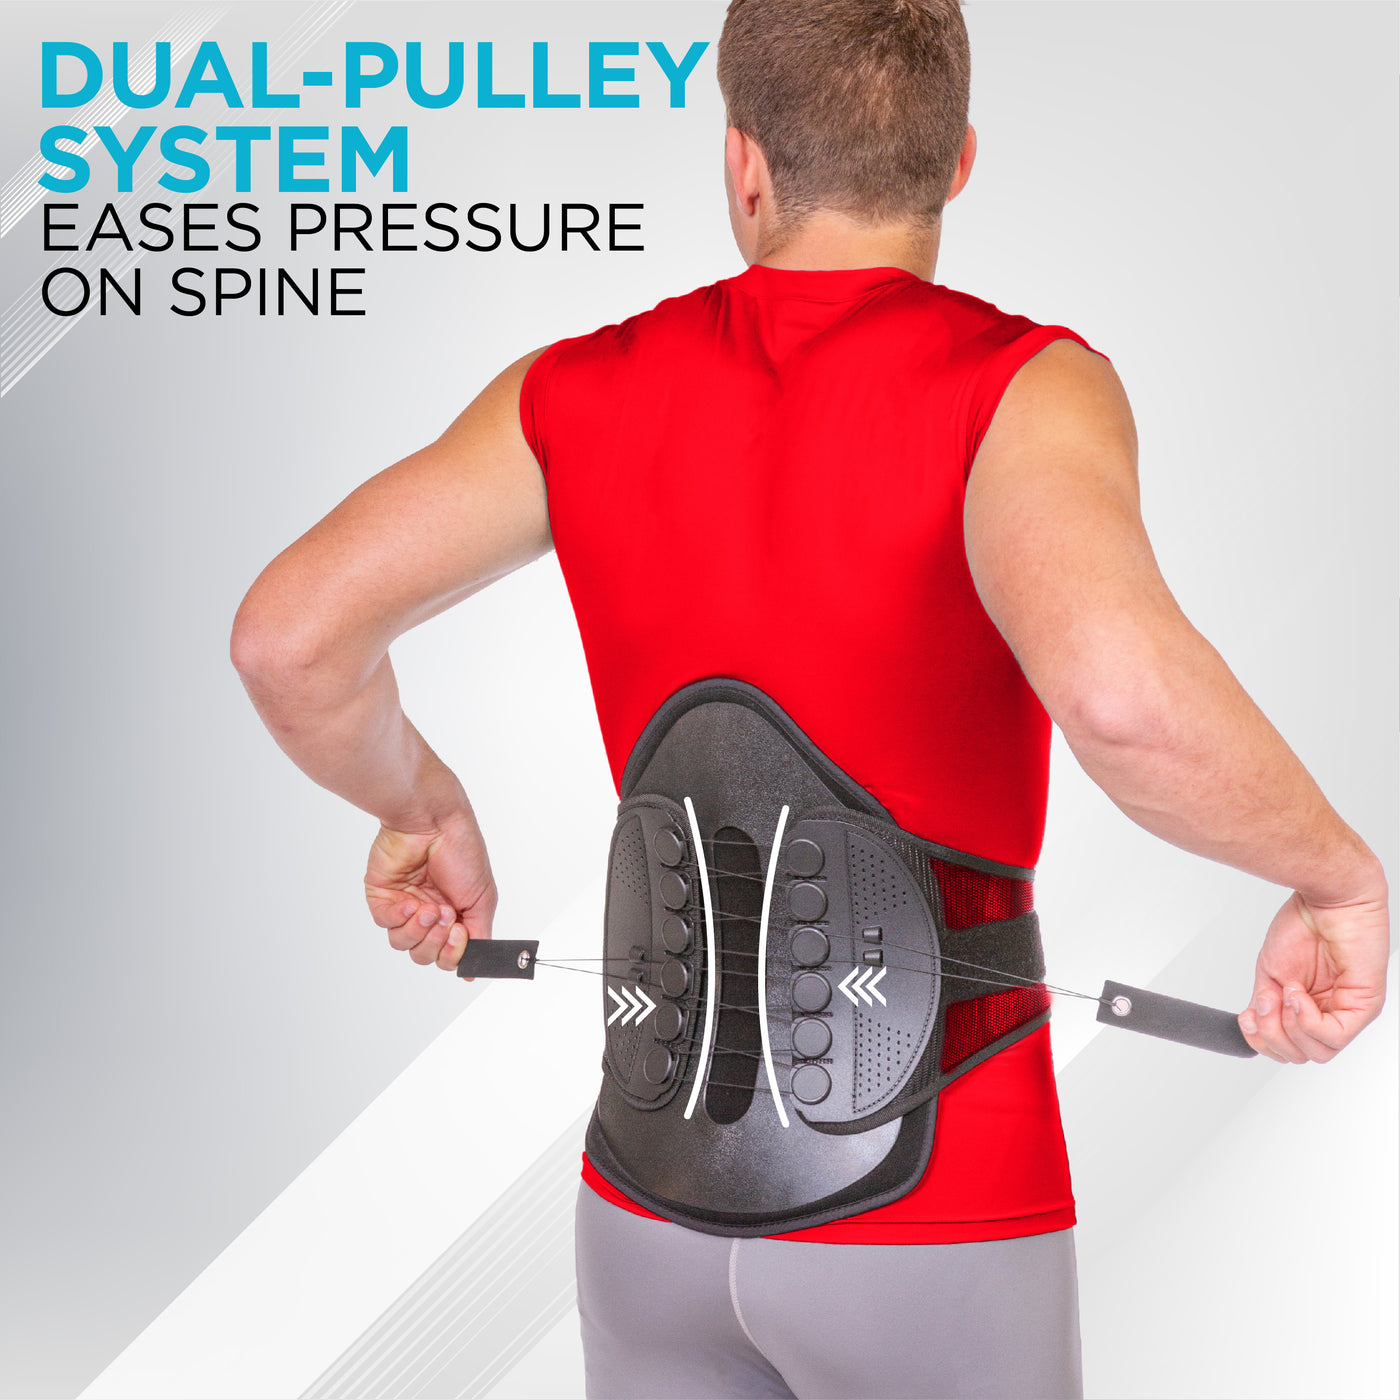 Dual-pulley system eases pressure on spine to decompress spine